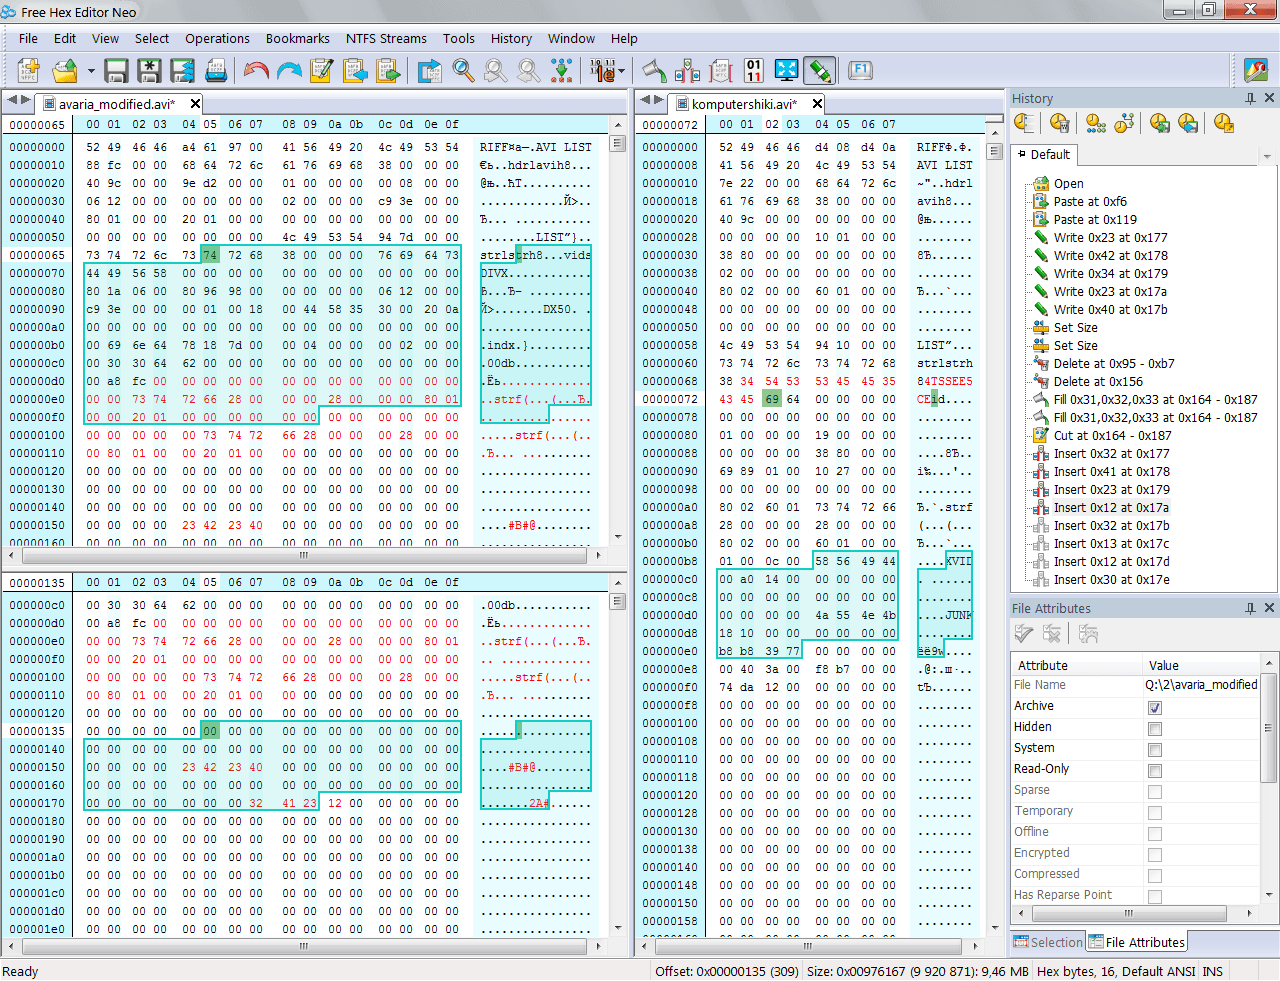 Free Hex Editor Software